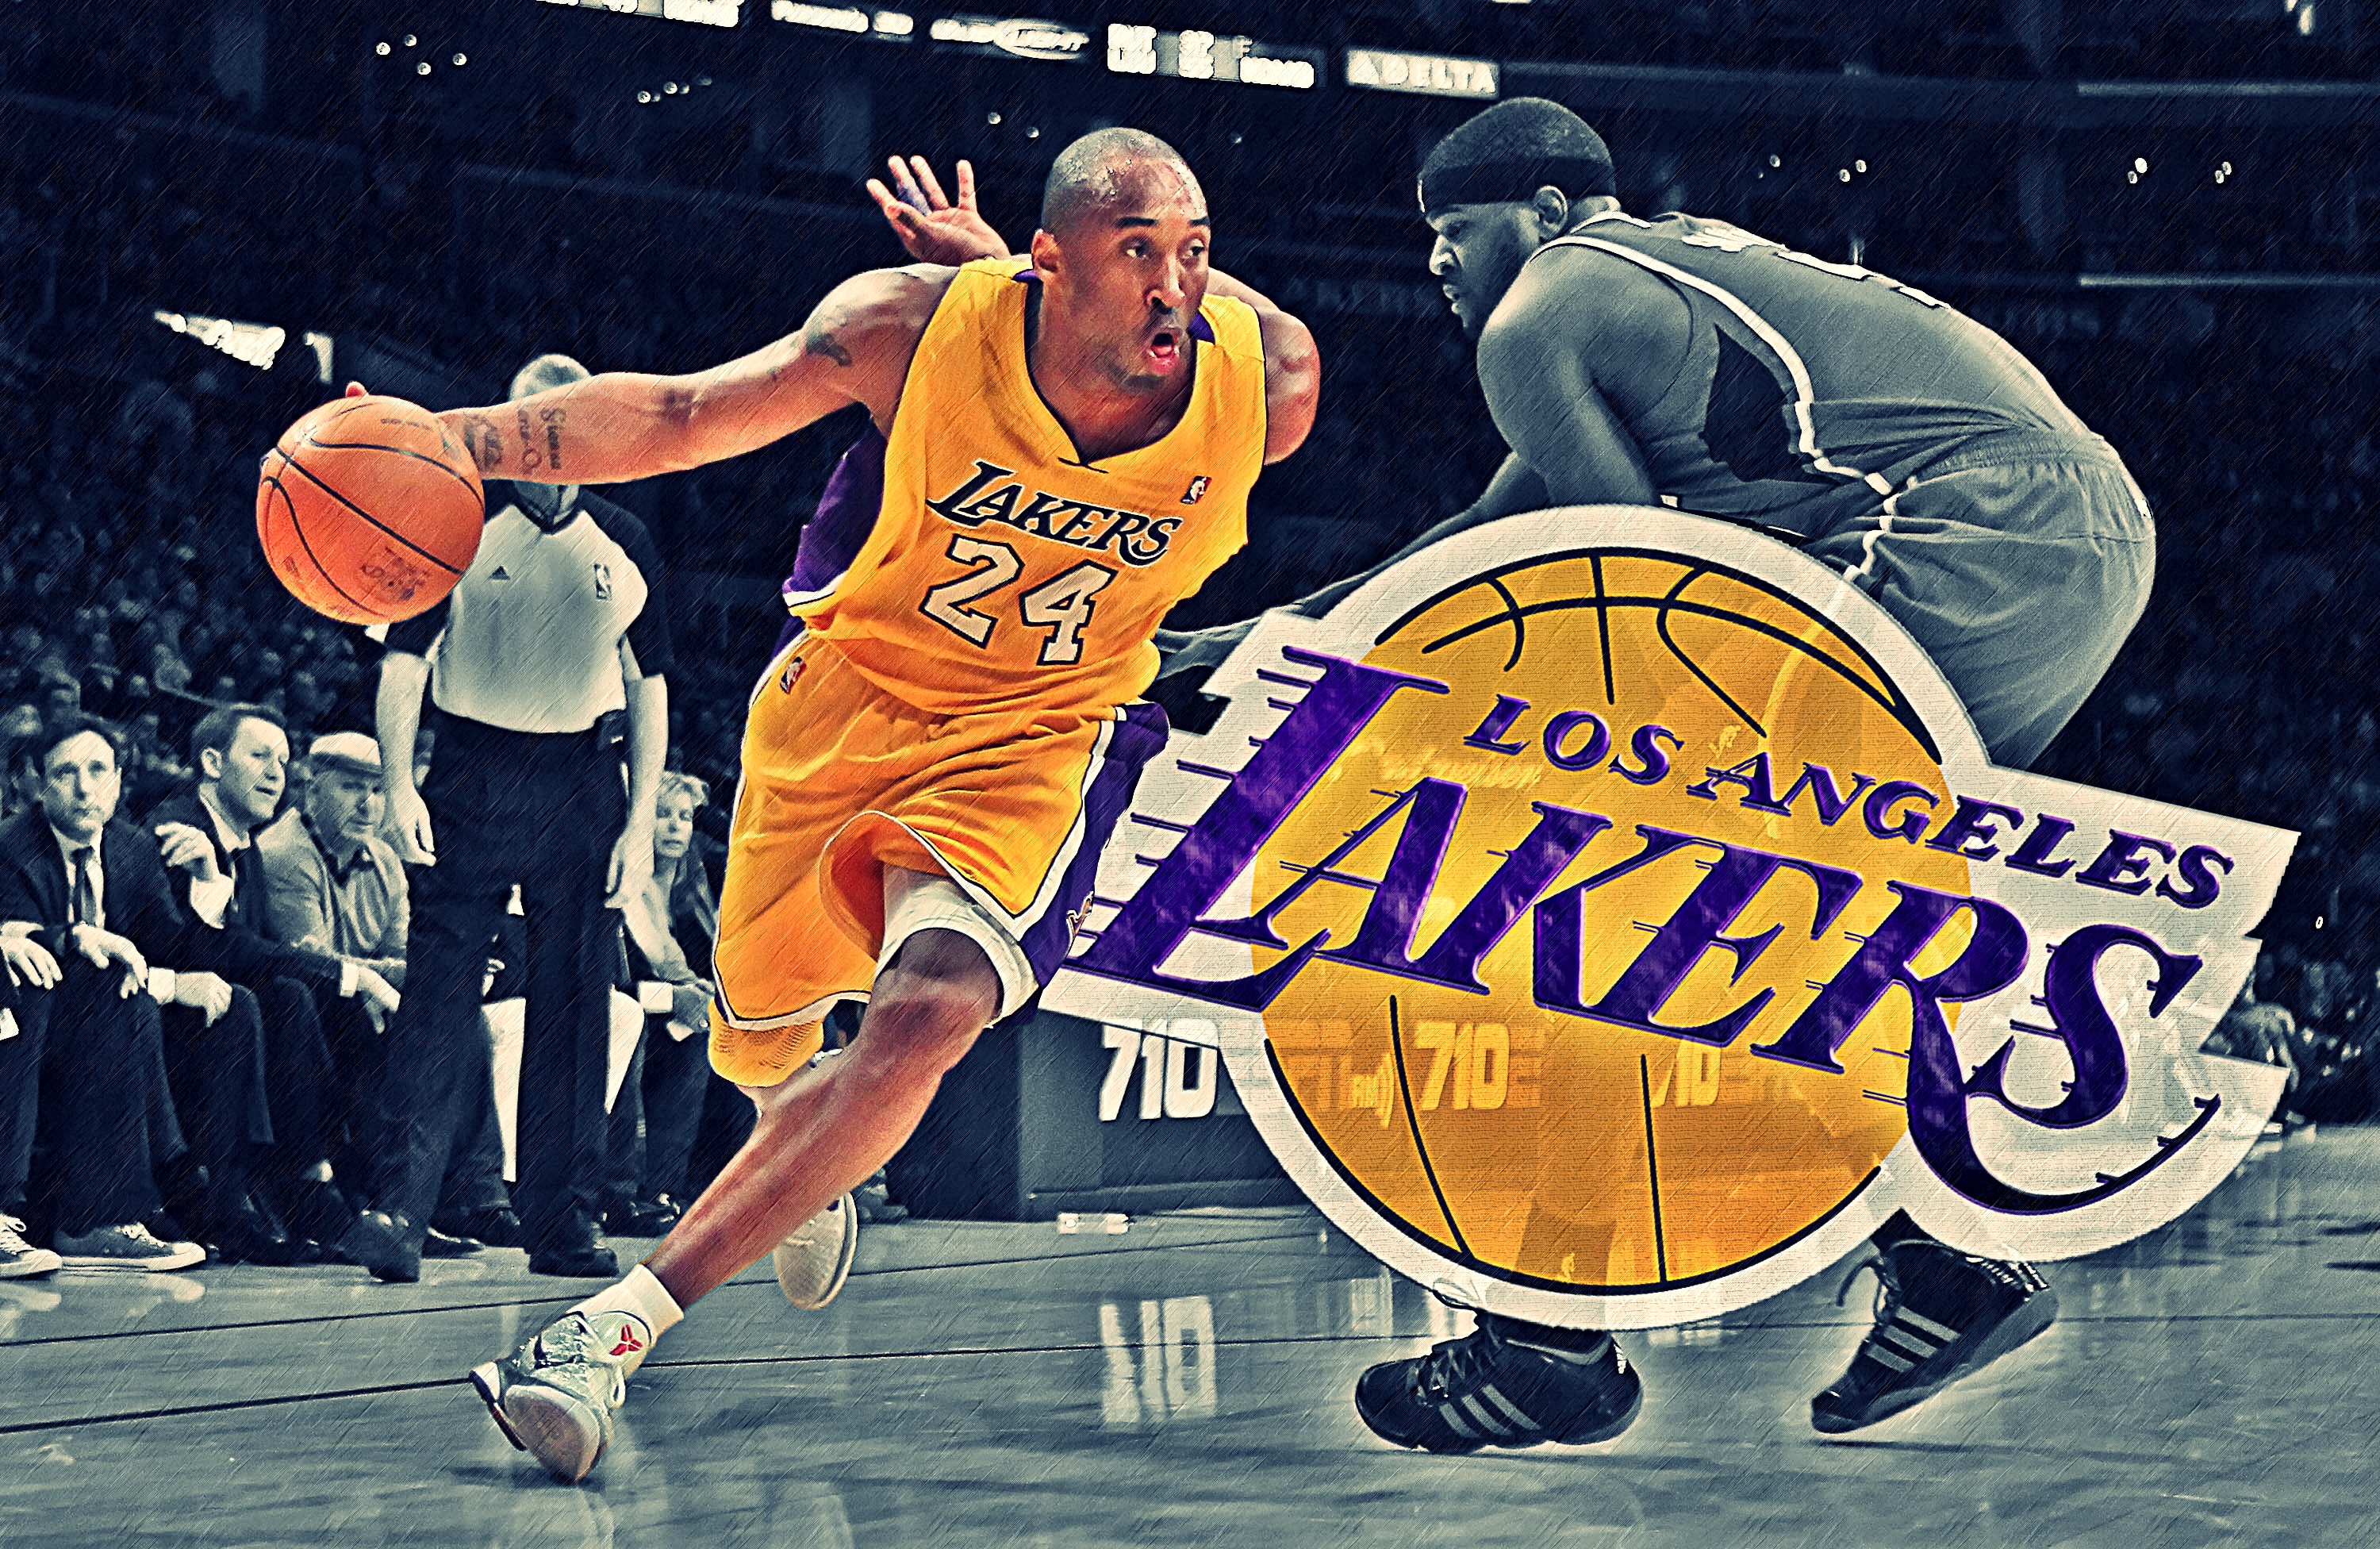 Free download Wallpapers NBA [kobe bryant] [800x600] for your